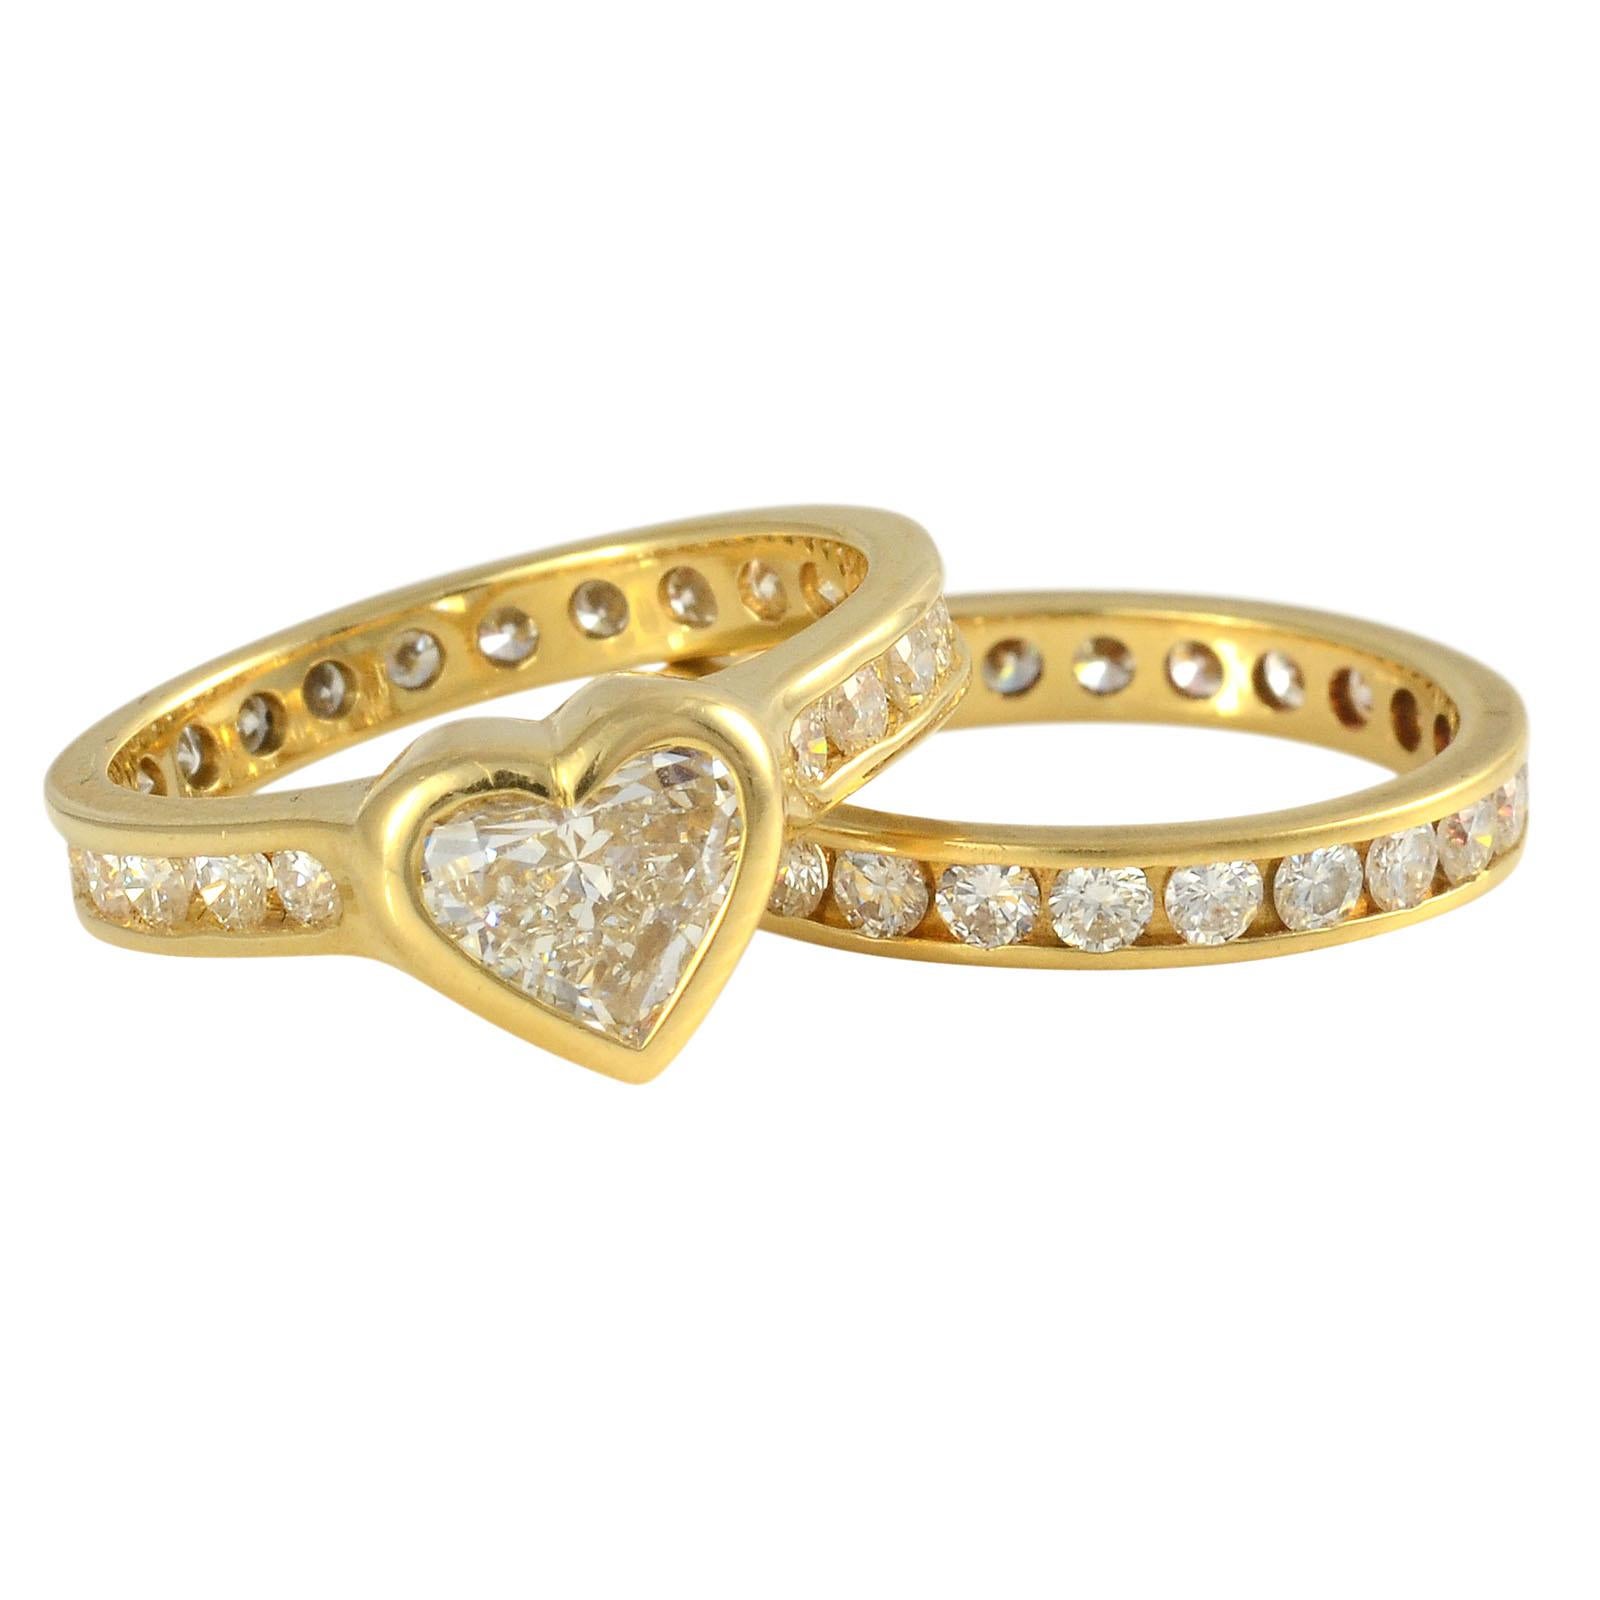 Estate 18K yellow gold heart diamond wedding set. The estate wedding set features a 0.72 carat heart diamond with VS1 clarity and F color. This heart diamond engagement ring also has 22 channel set diamonds at 0.82 carat total weight with VS1-2